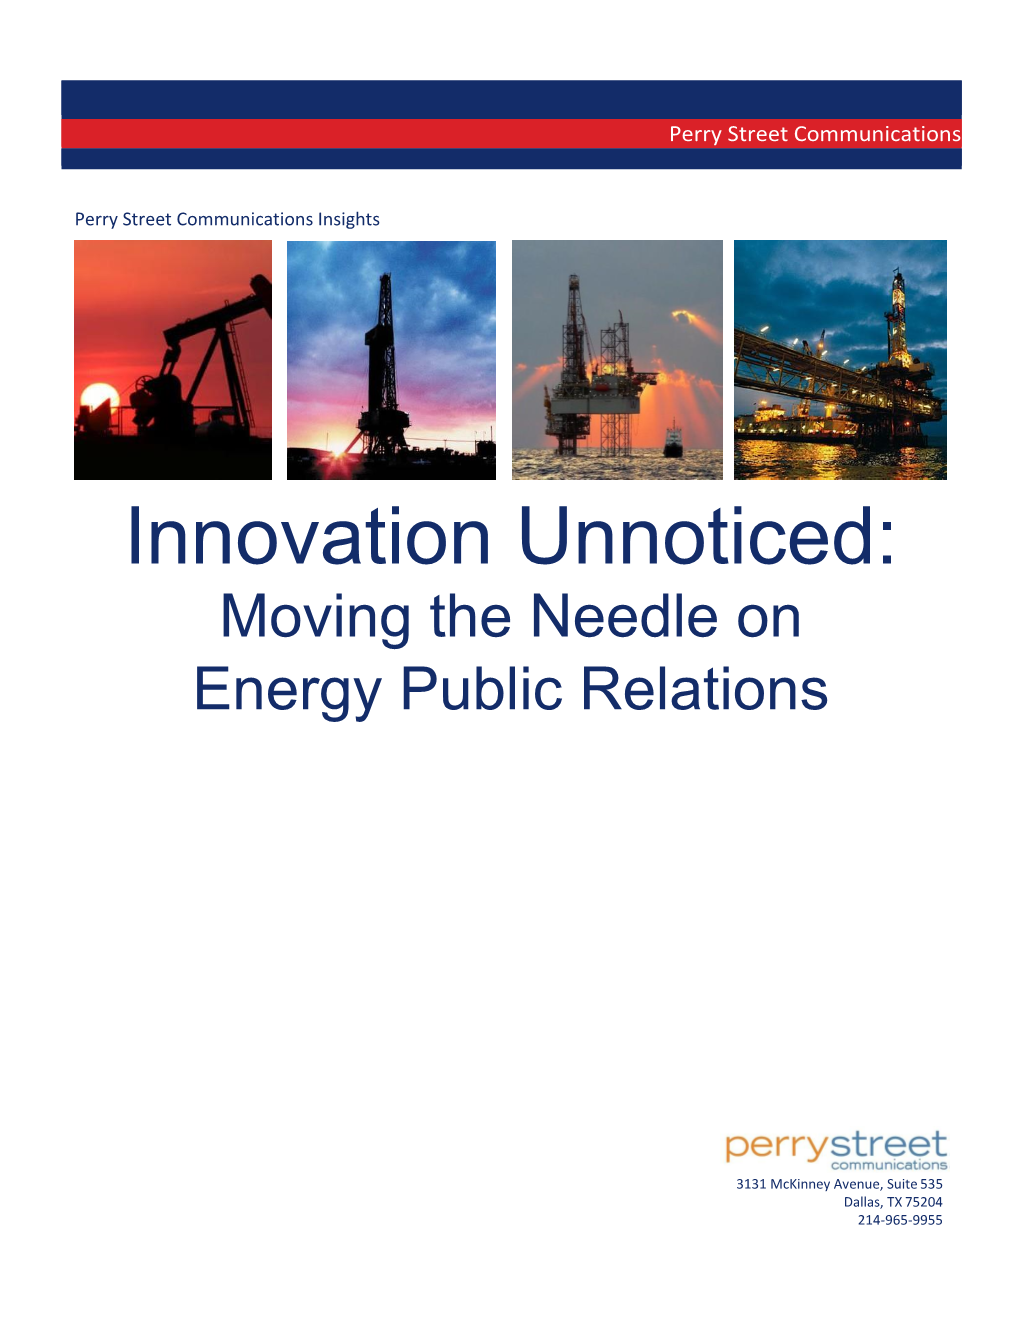 Innovation Unnoticed: Moving the Needle on Energy Public Relations